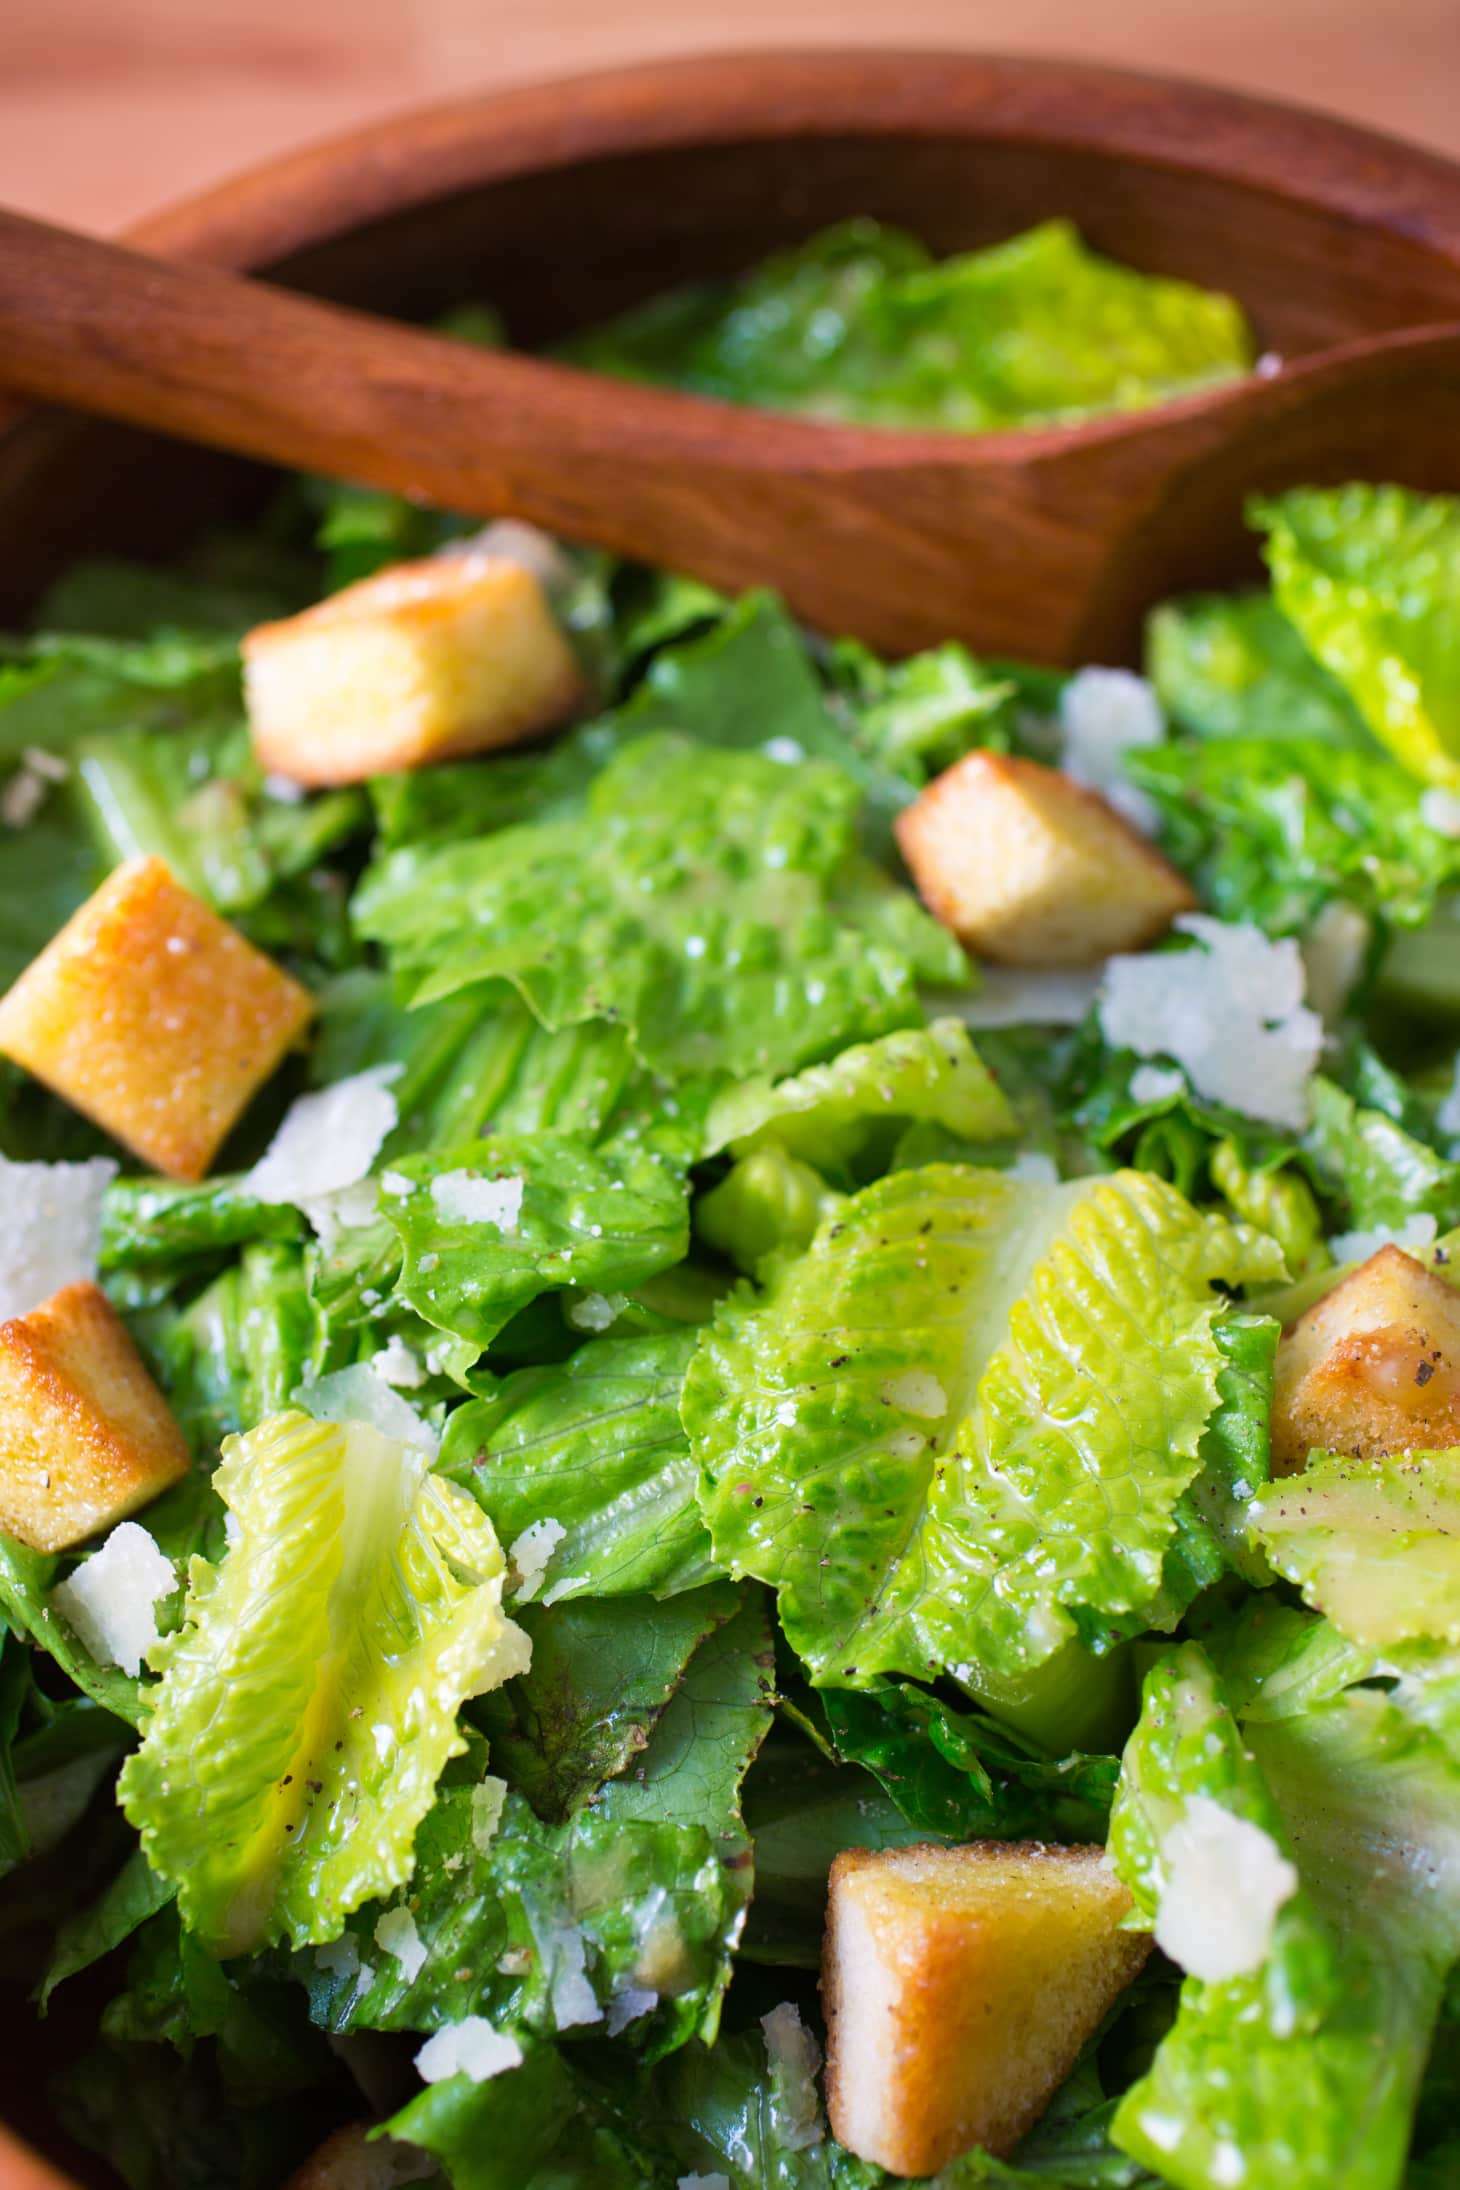 How To Make the Ultimate Classic Caesar Salad